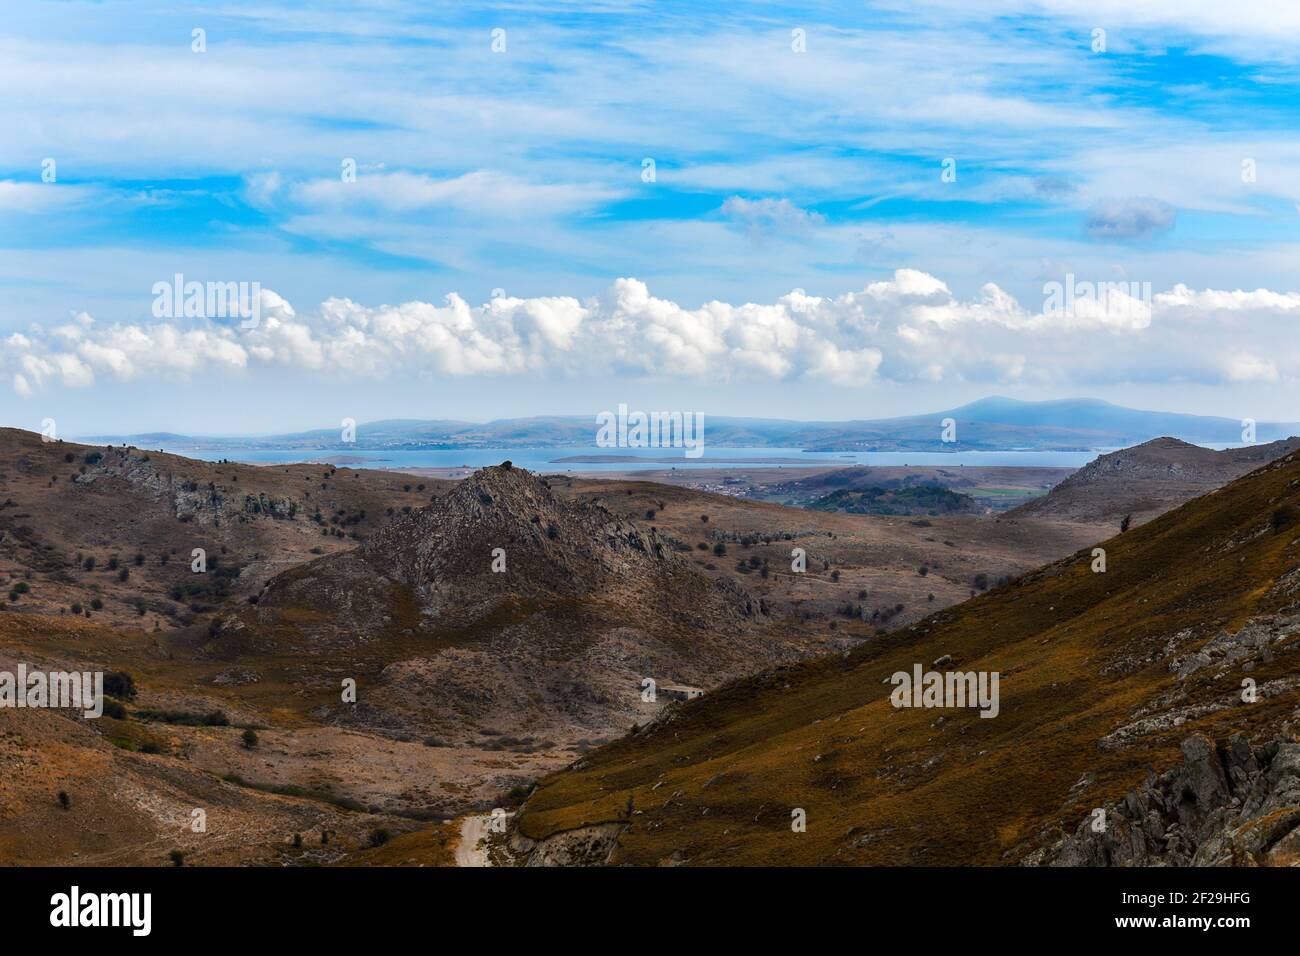 A mountain range with rocks and bushes against the backdrop of the sea and the bay of Moudros on the island of Lemnos in Greece. Stock Photo